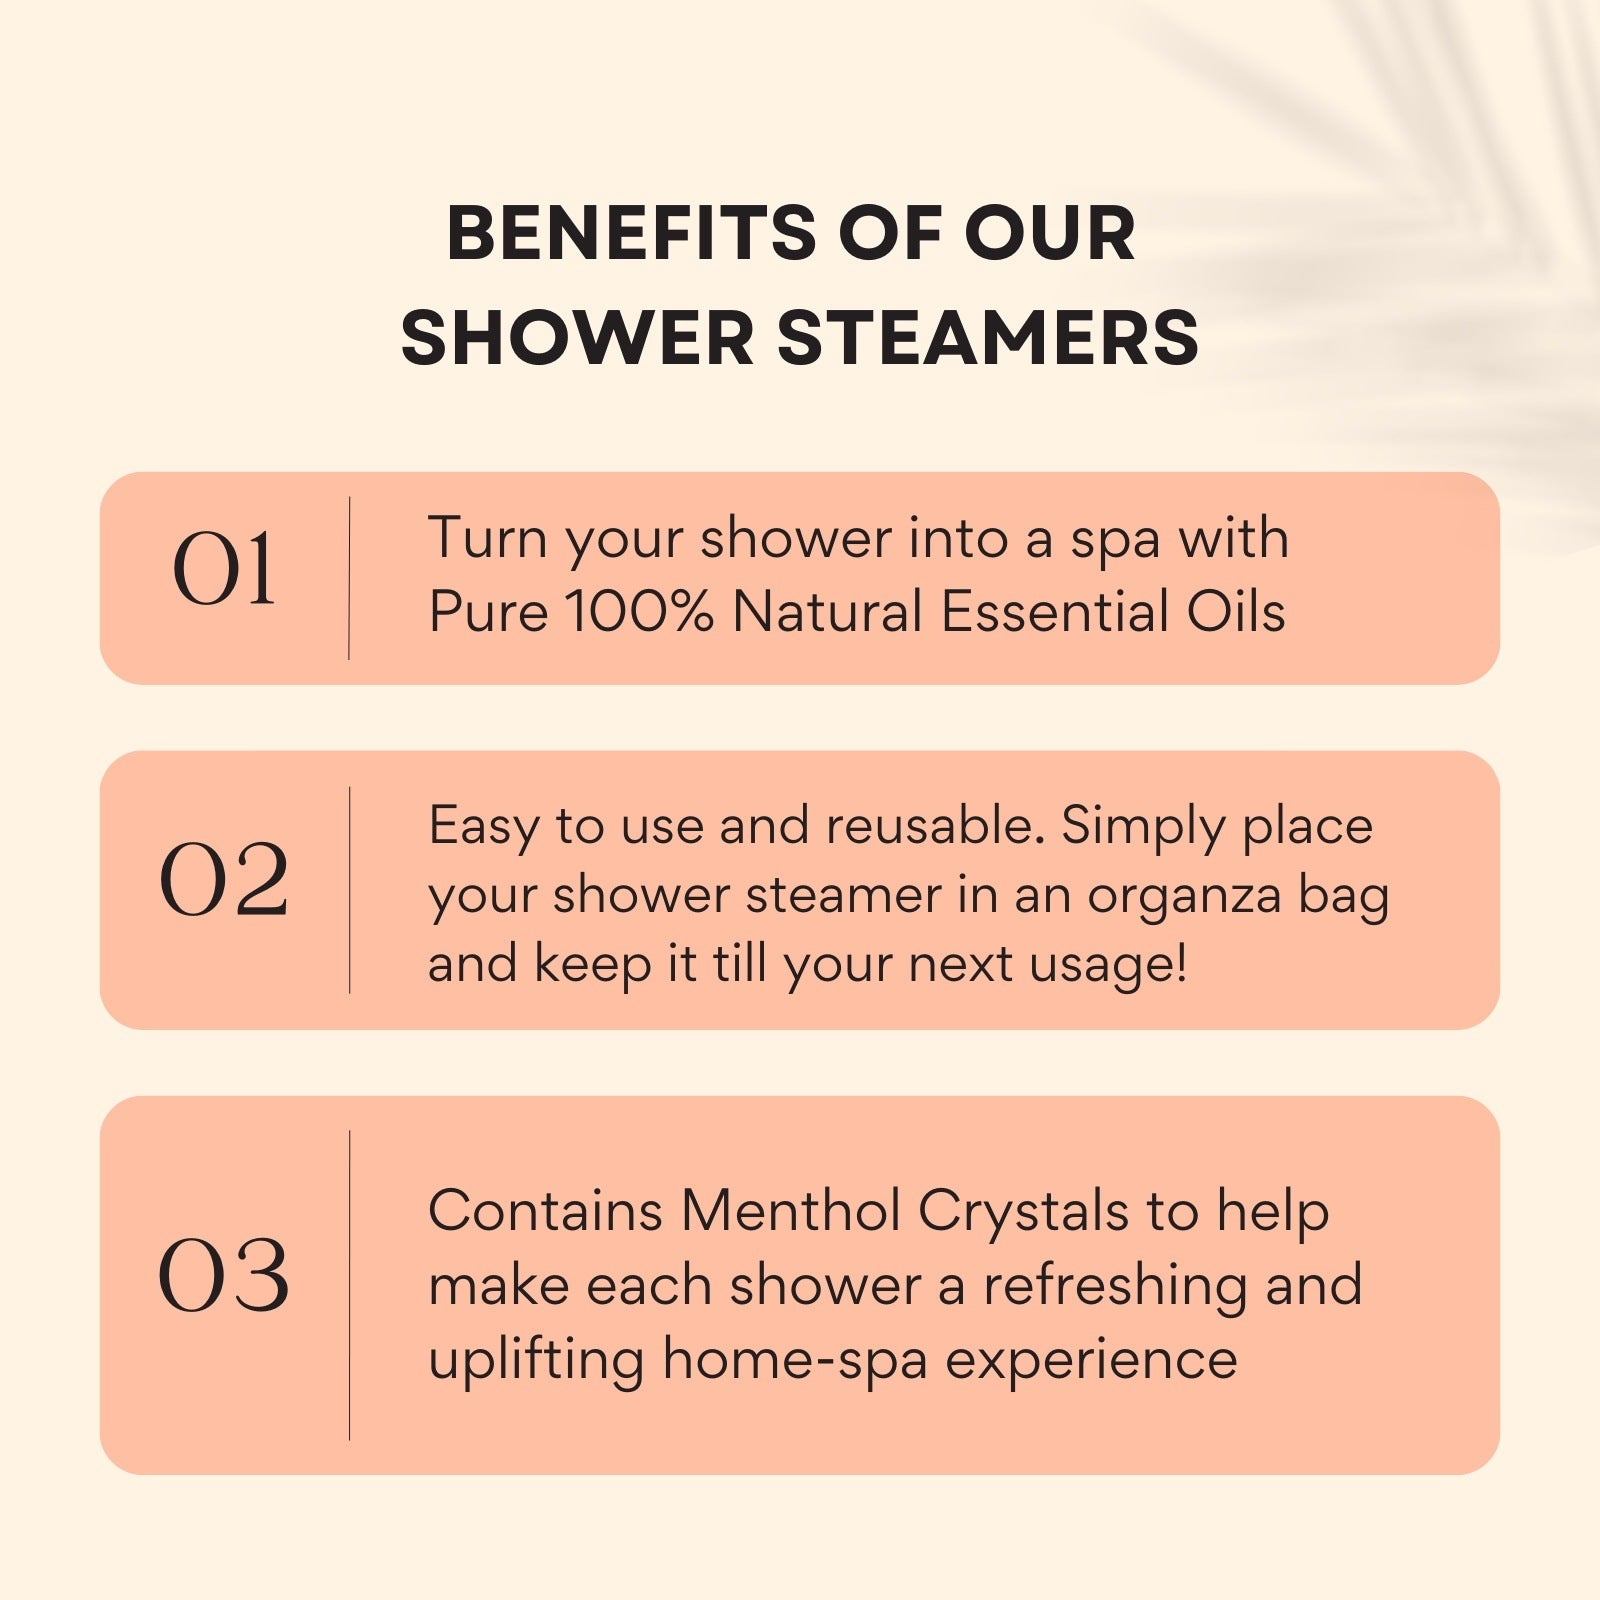 Benefits of Shower Steamers